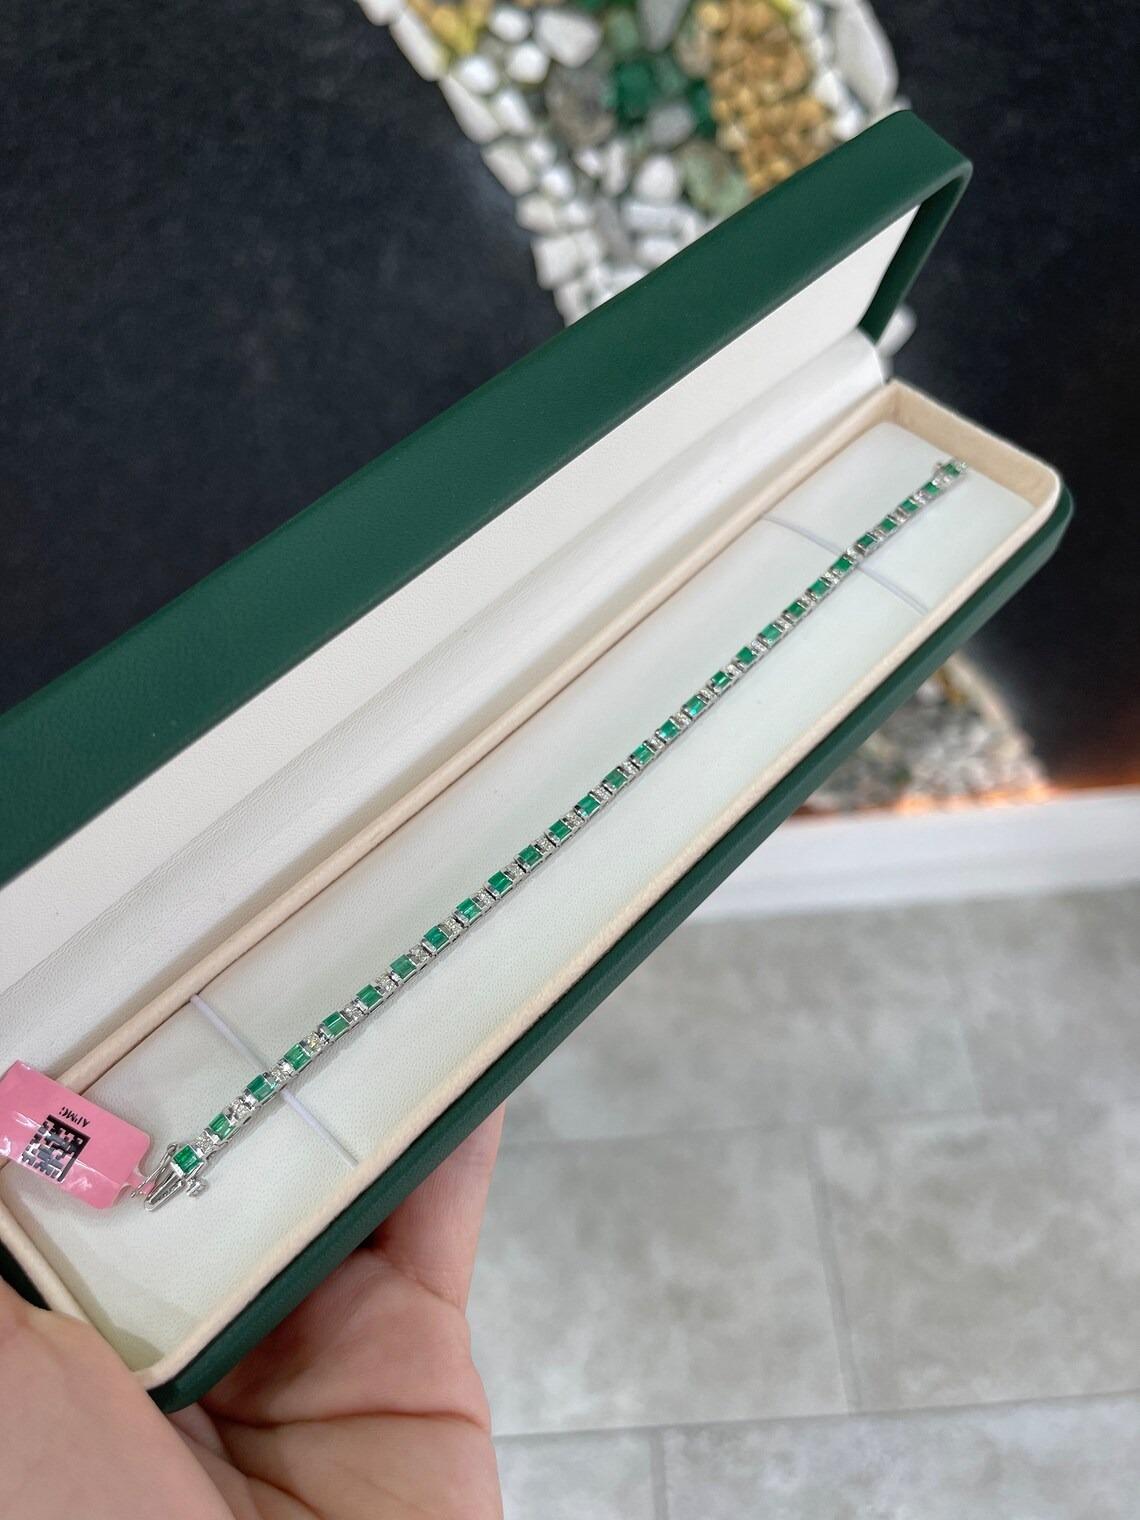 A stunning emerald and diamond bracelet. This sleek piece features over two carats in stunning natural emeralds that showcase a desirable vivid green color and superb qualities. Rows of two brilliant round cut diamonds accent in between each row of